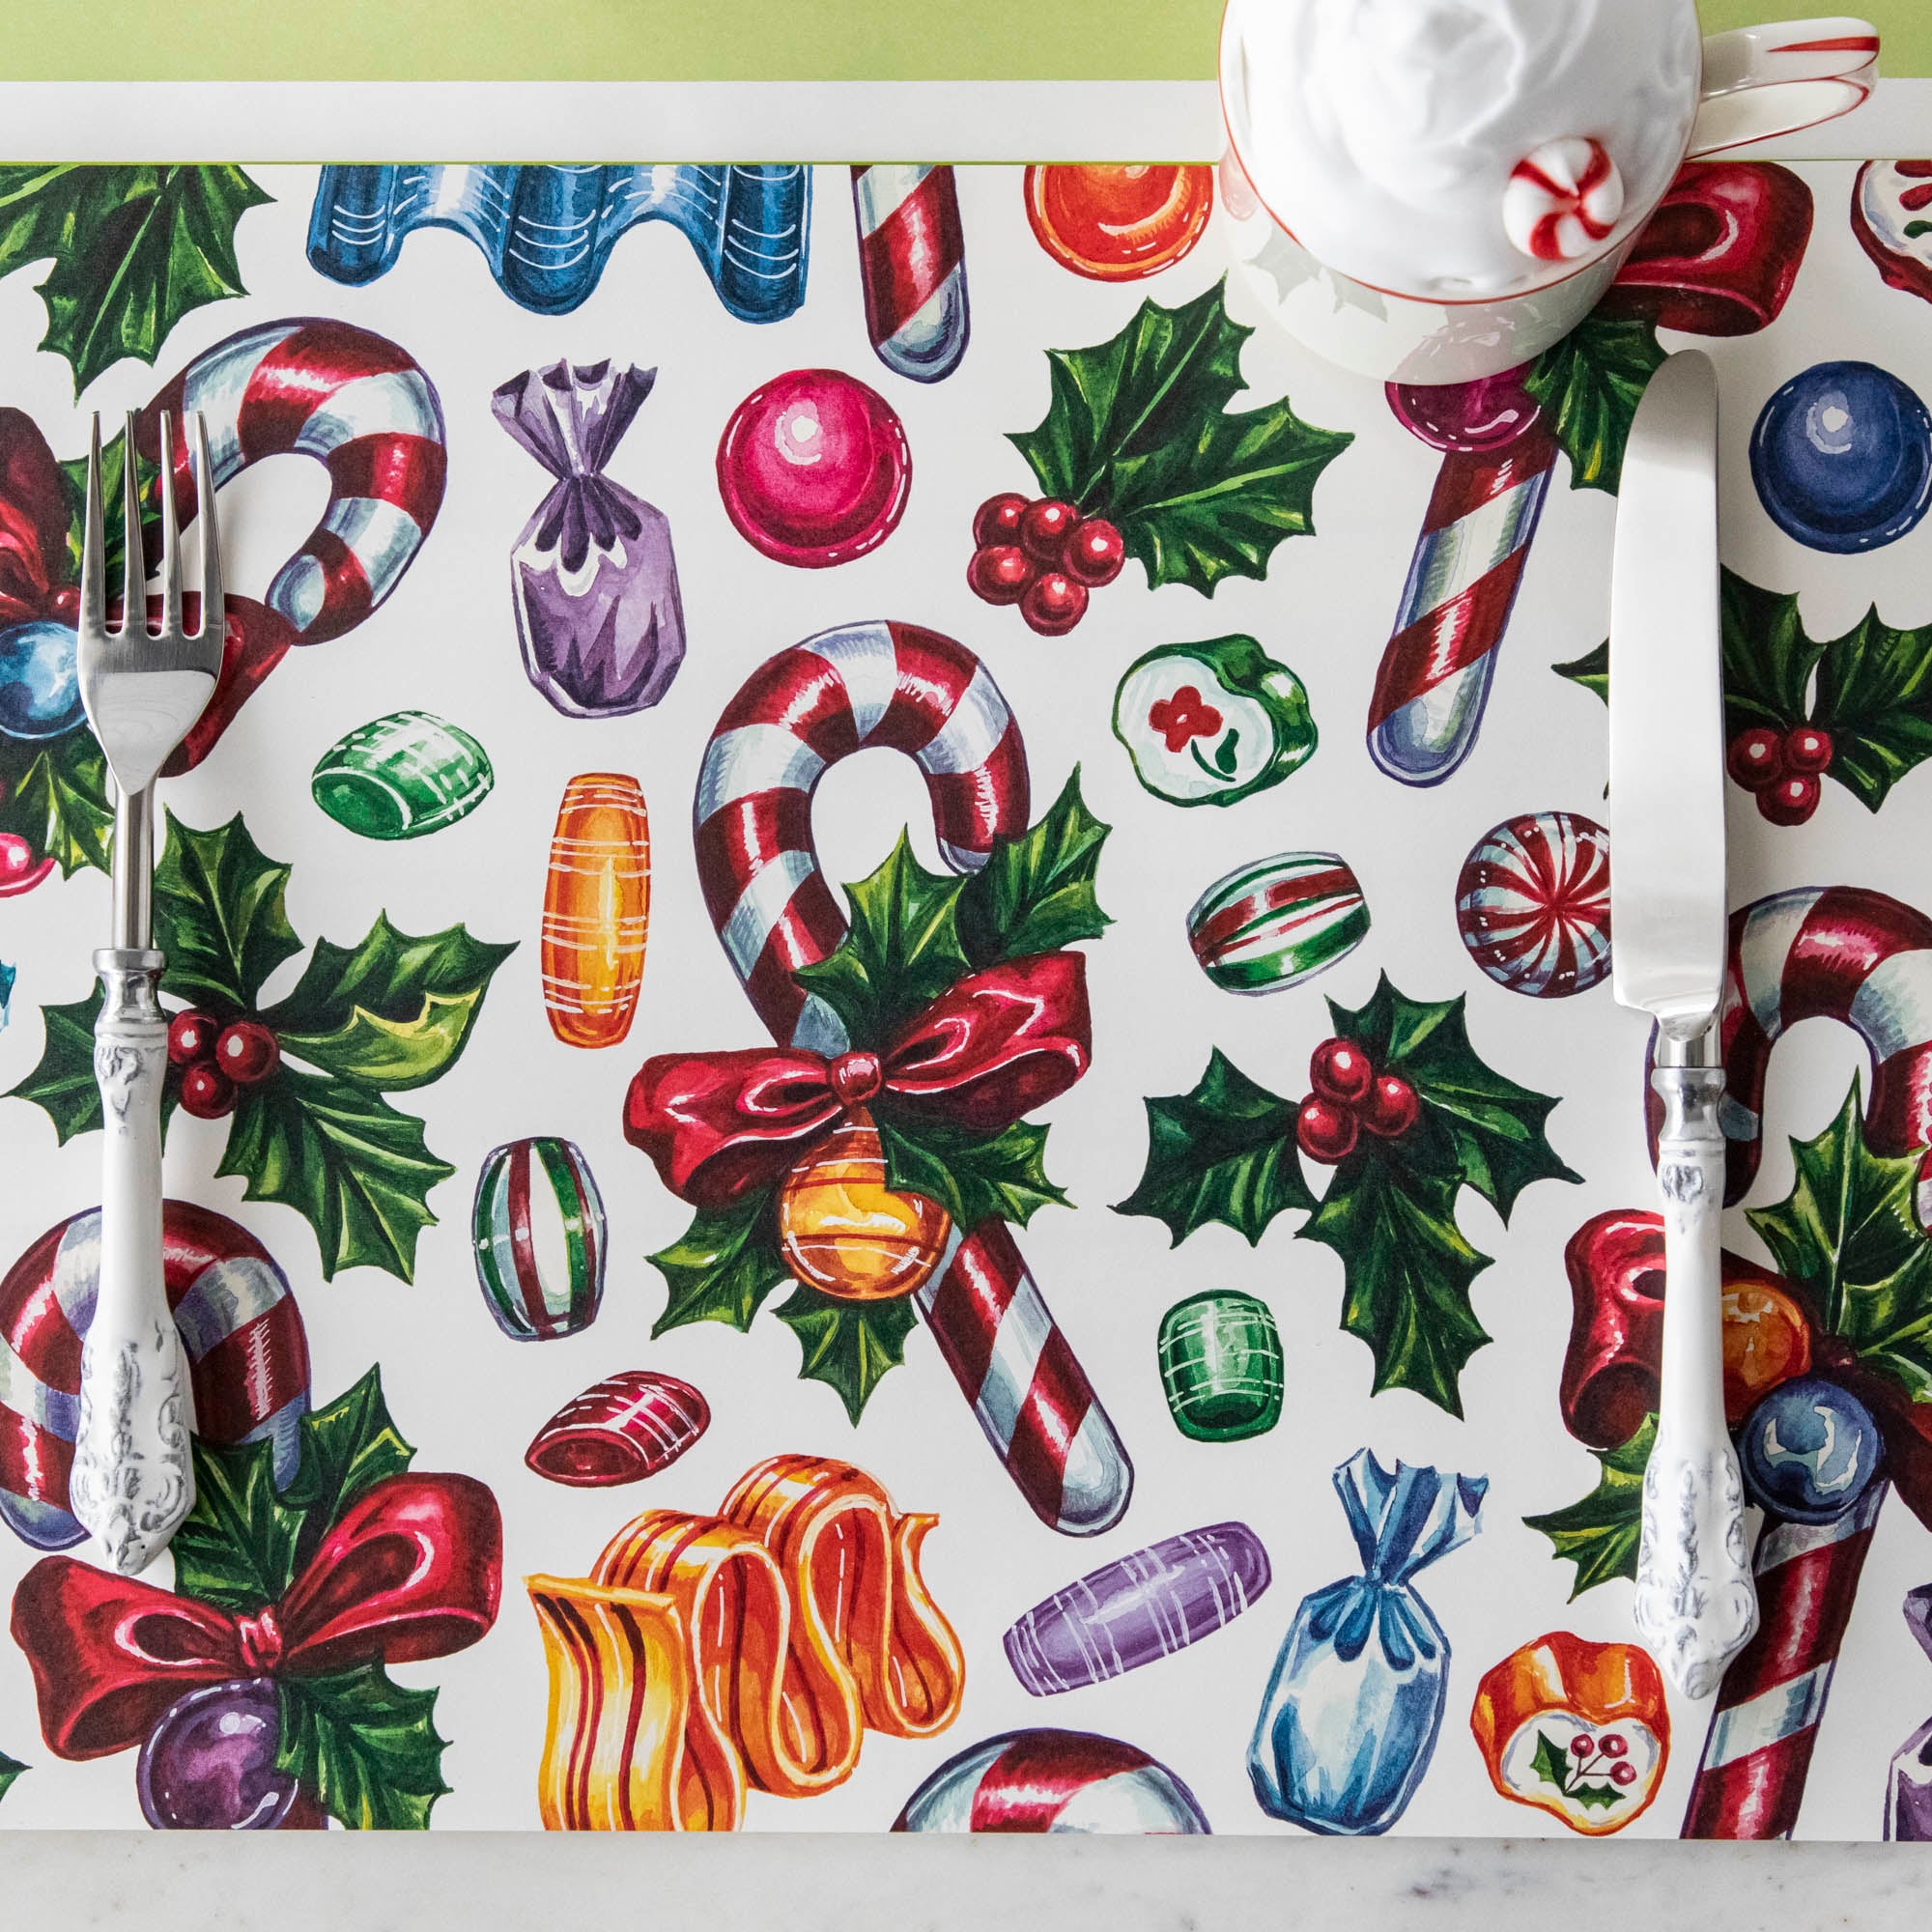 Table setting of Candy Cane Shoppe Placemat